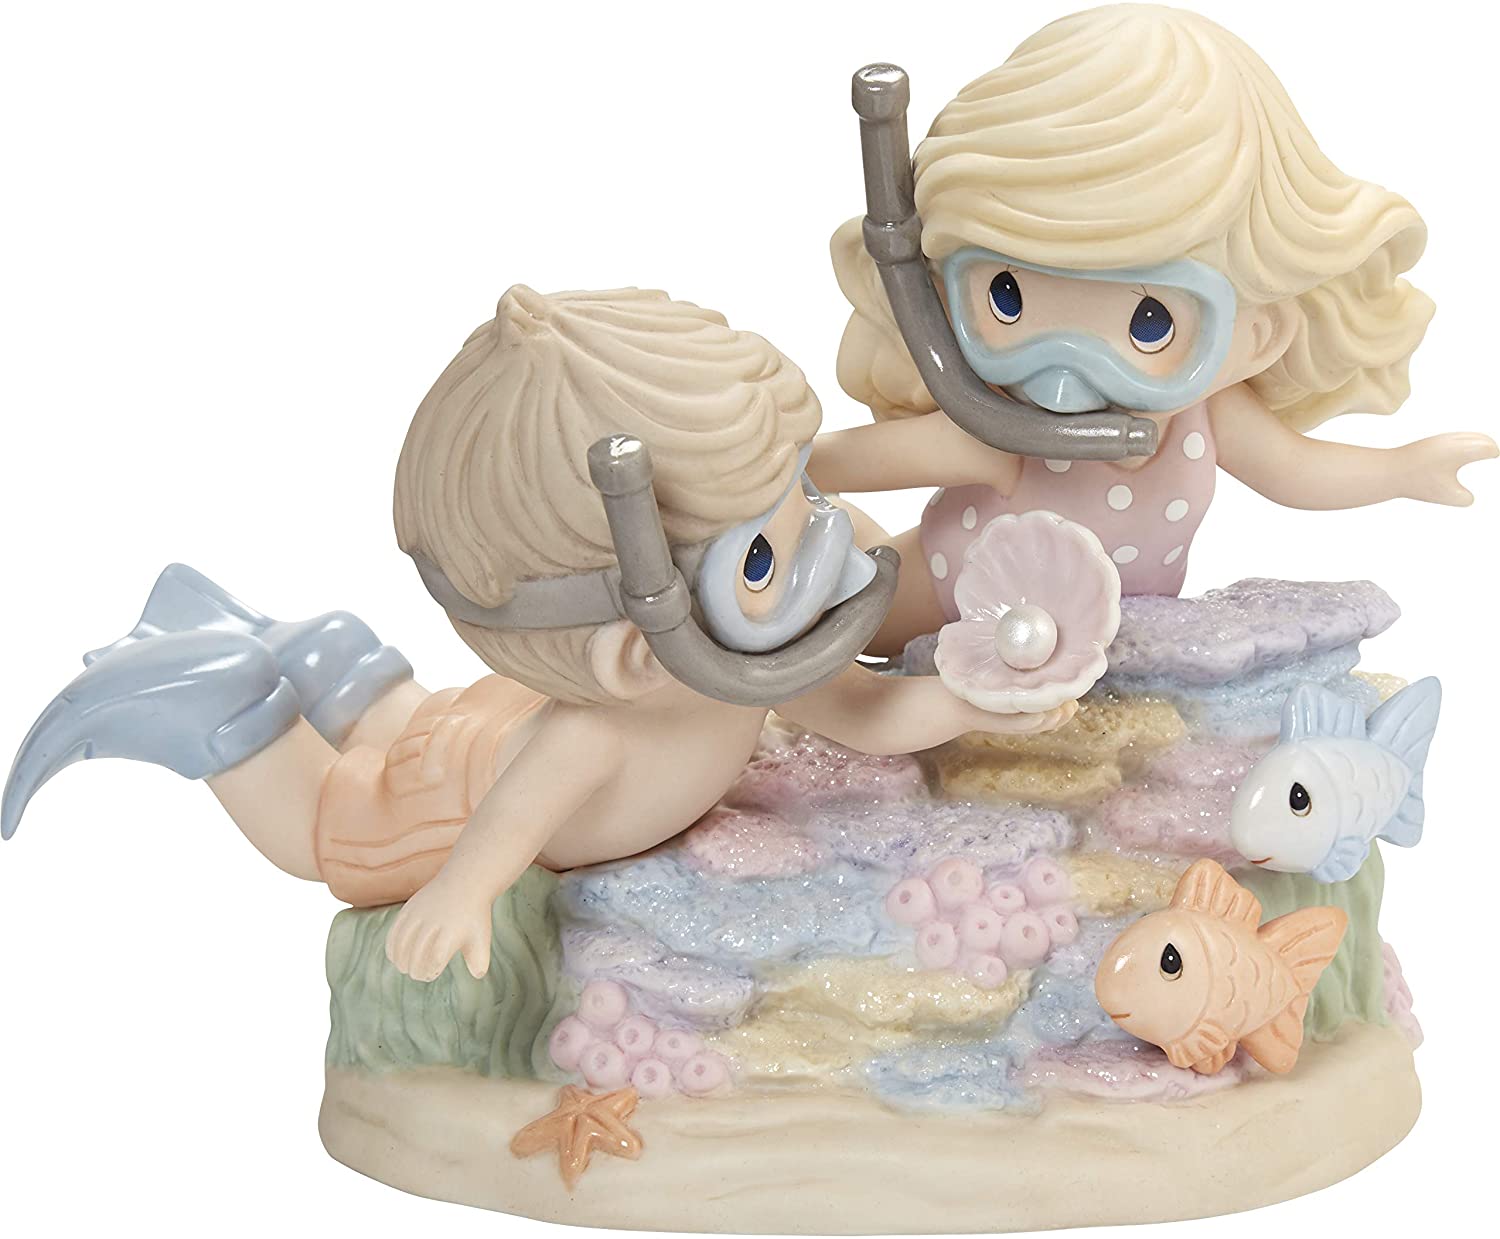 Precious Moments Your Love is A Precious Pearl Limited Edition Figurine #202010 - image 1 of 3